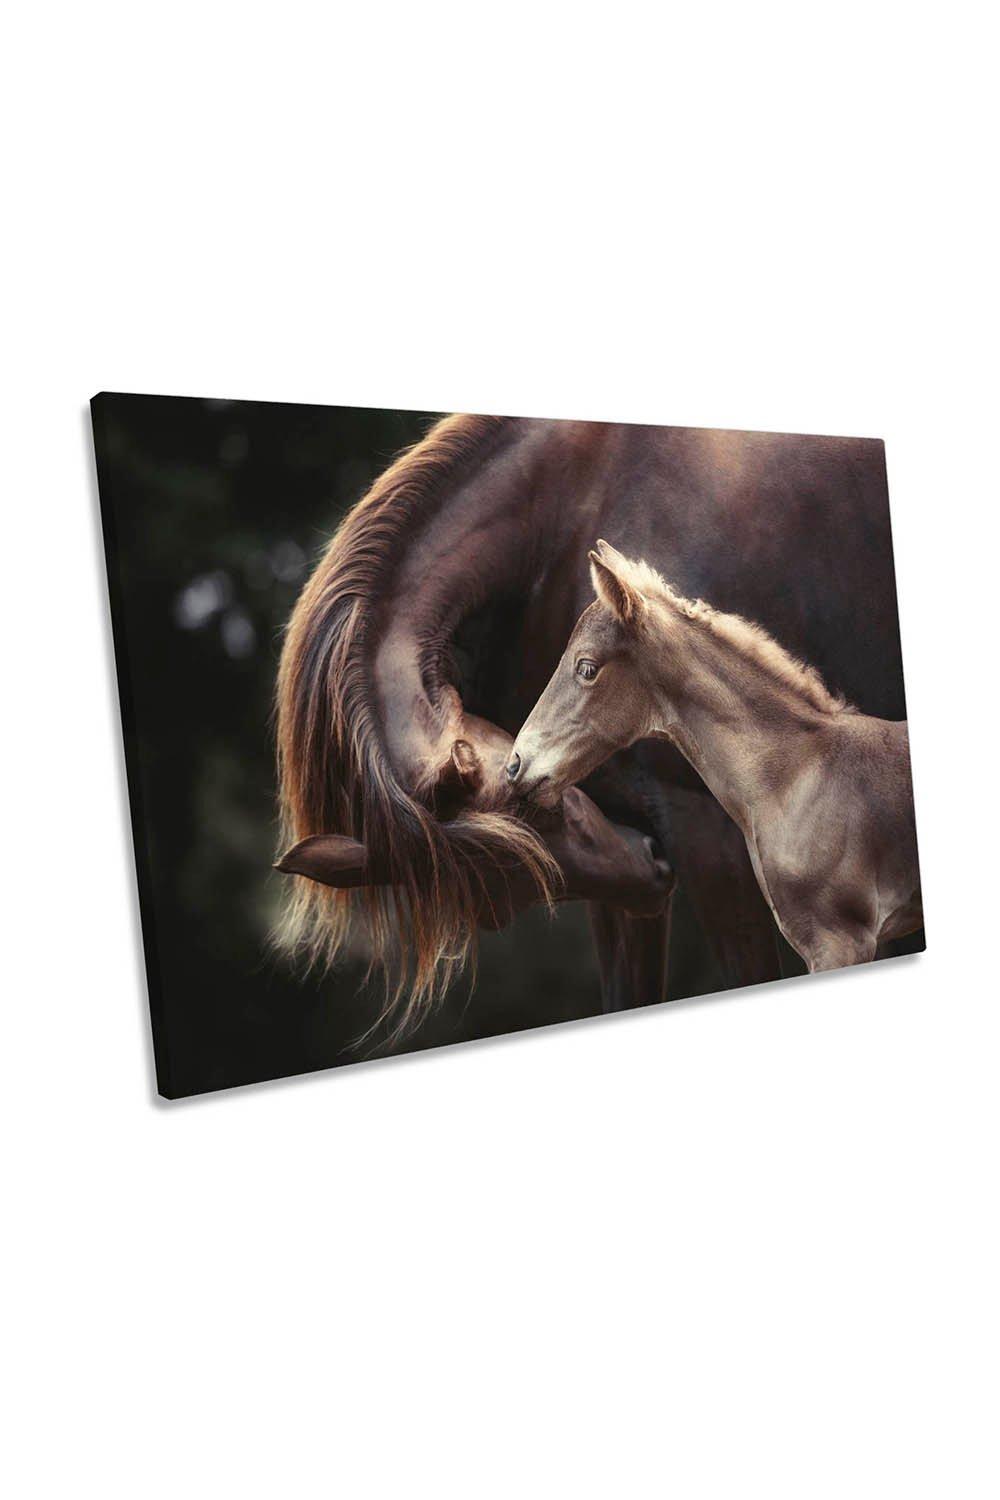 The Bond Horse Family Foal Canvas Wall Art Picture Print